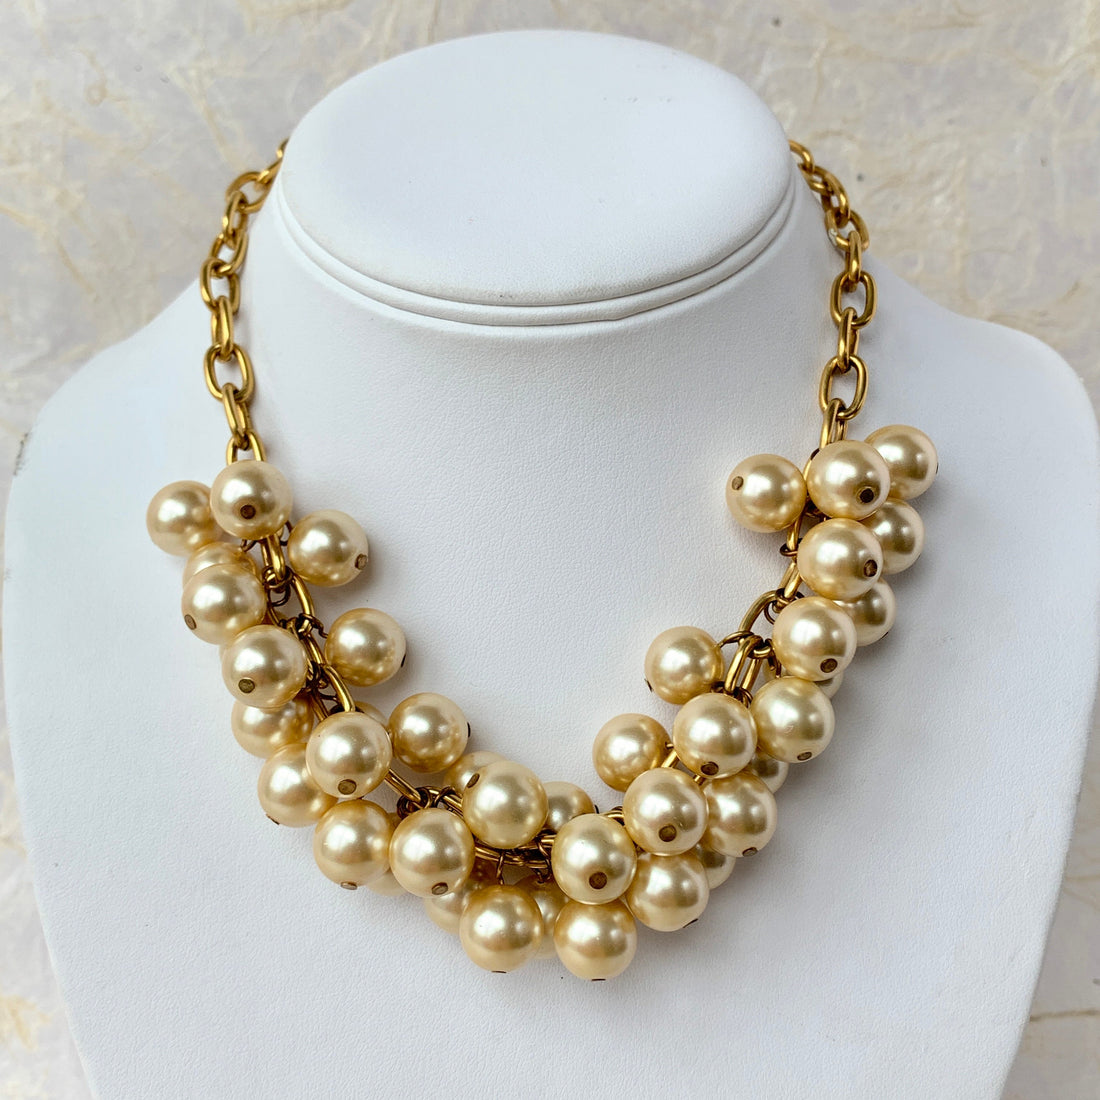 Lovely Antique Pearl Cluster Choker Necklace Set - DREAMJWELL - 384845